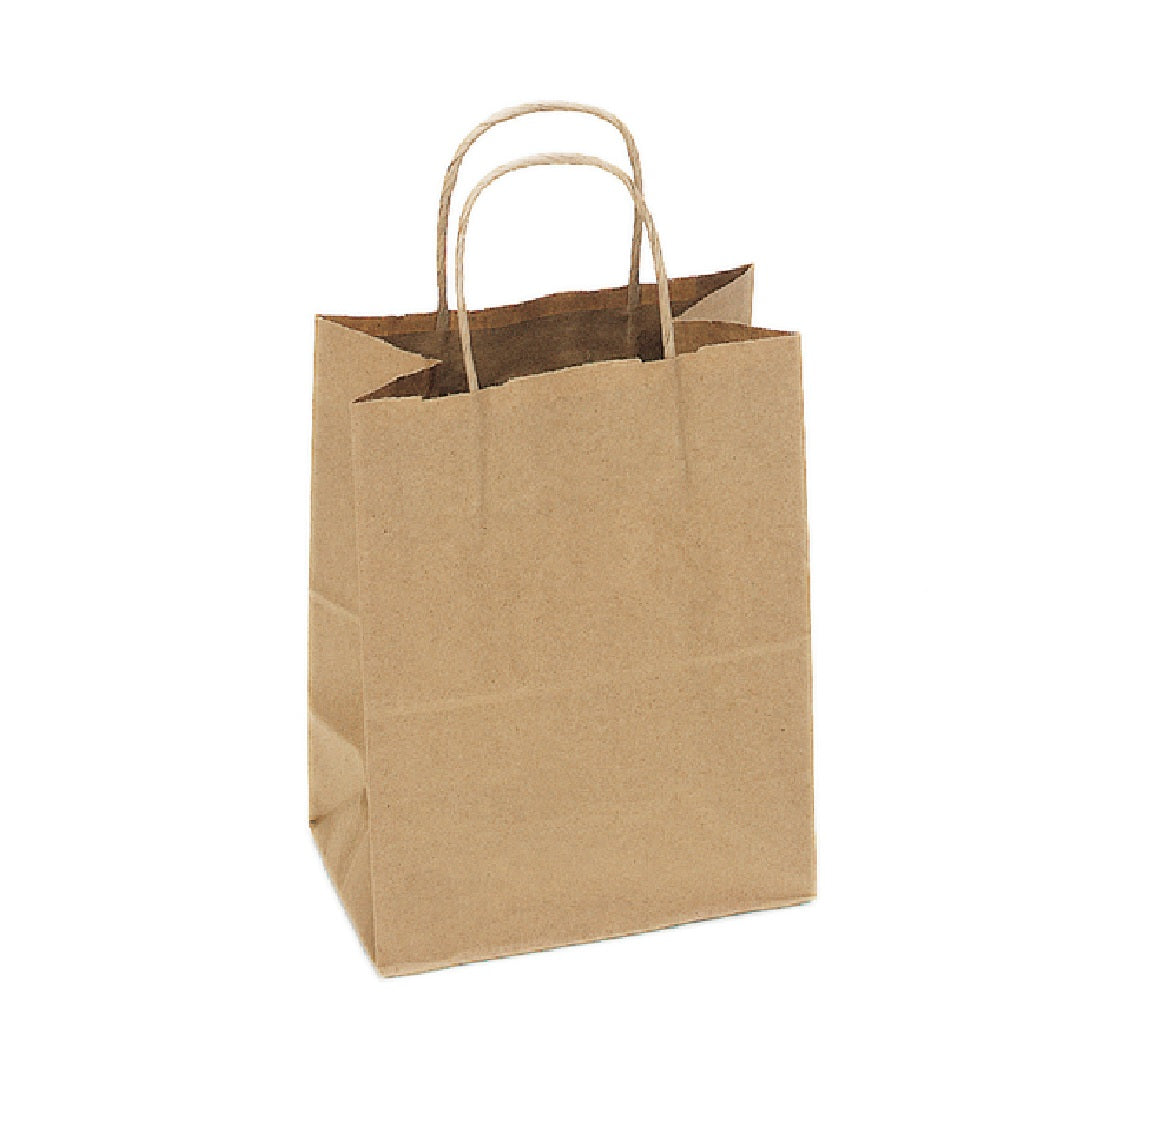 ProAmpac TNK-0810 Shopping Bag With Handles, Paper